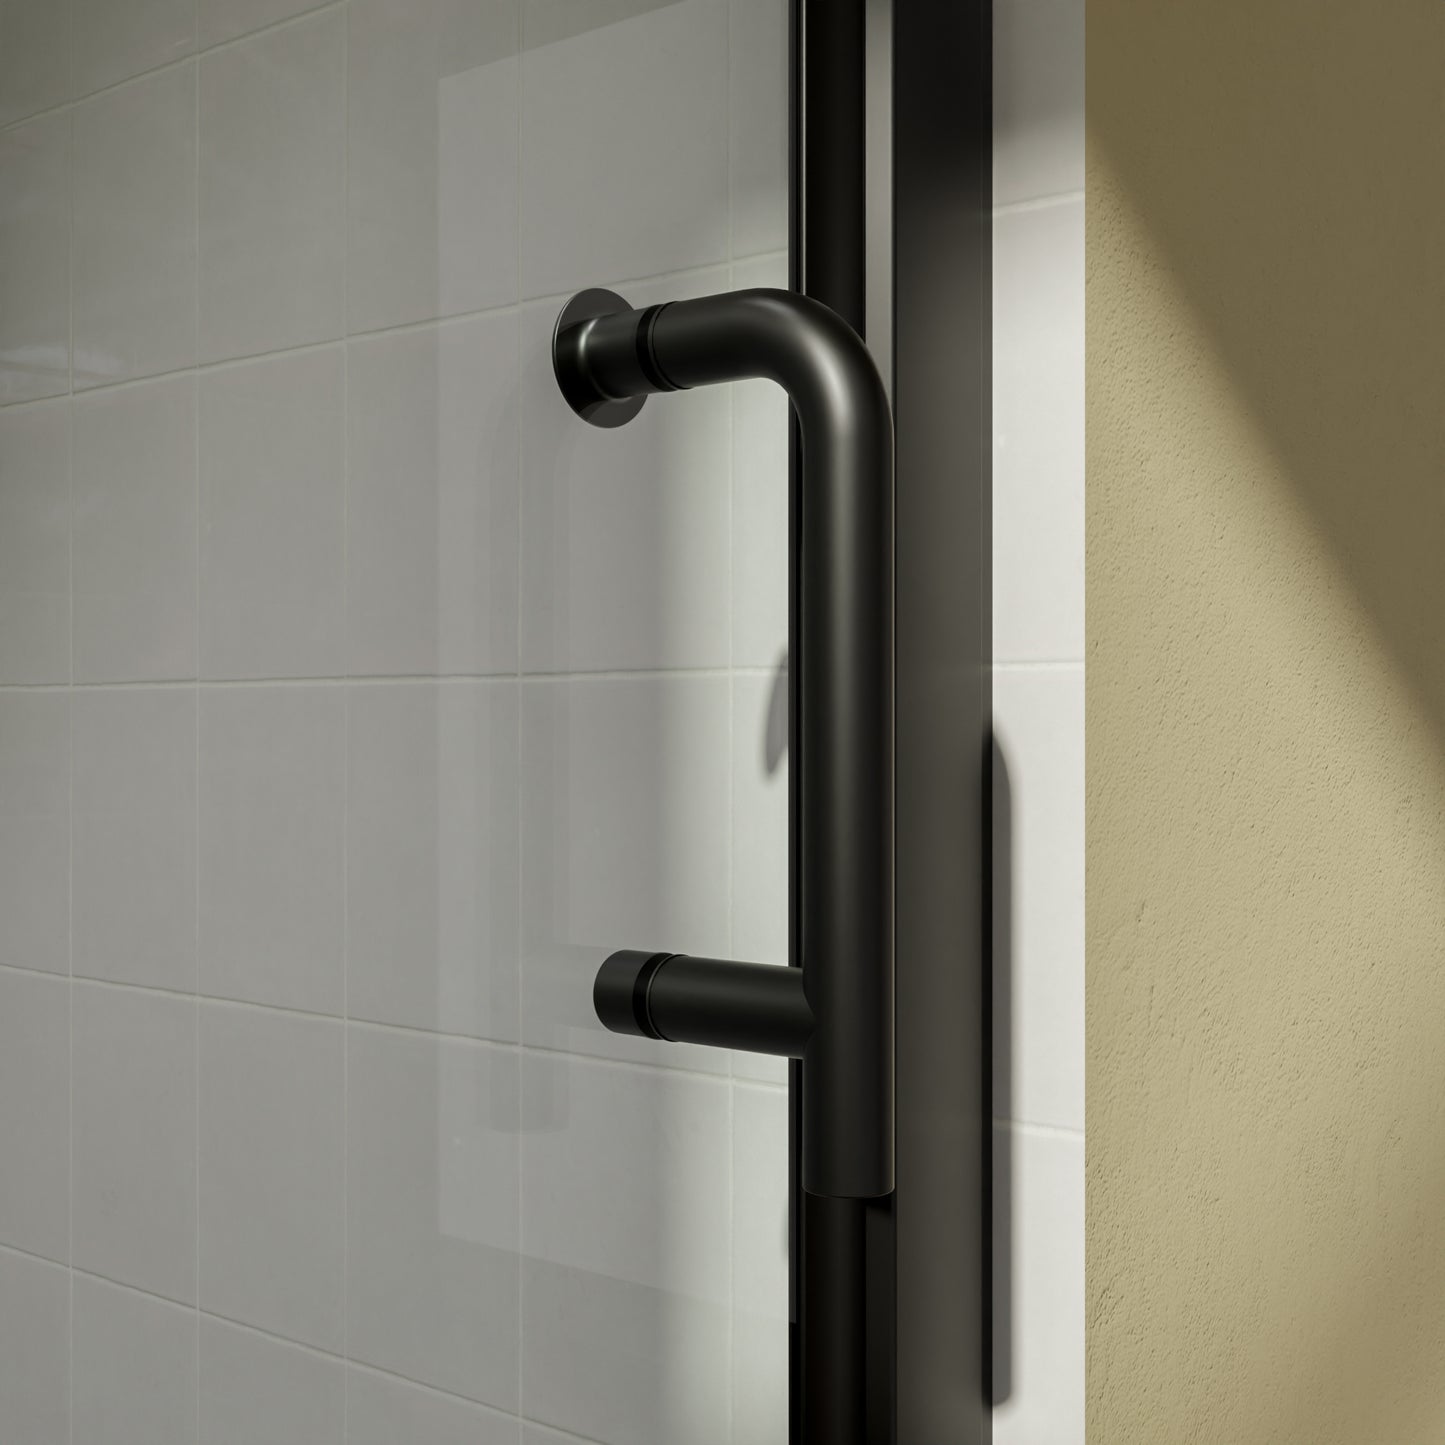 34" x 72" Pivot Glass Shower Door with Tempered Glass Swing Bathroom Shower Doors with Stainless Handle Frameless Hinged Shower Panel Matte Black